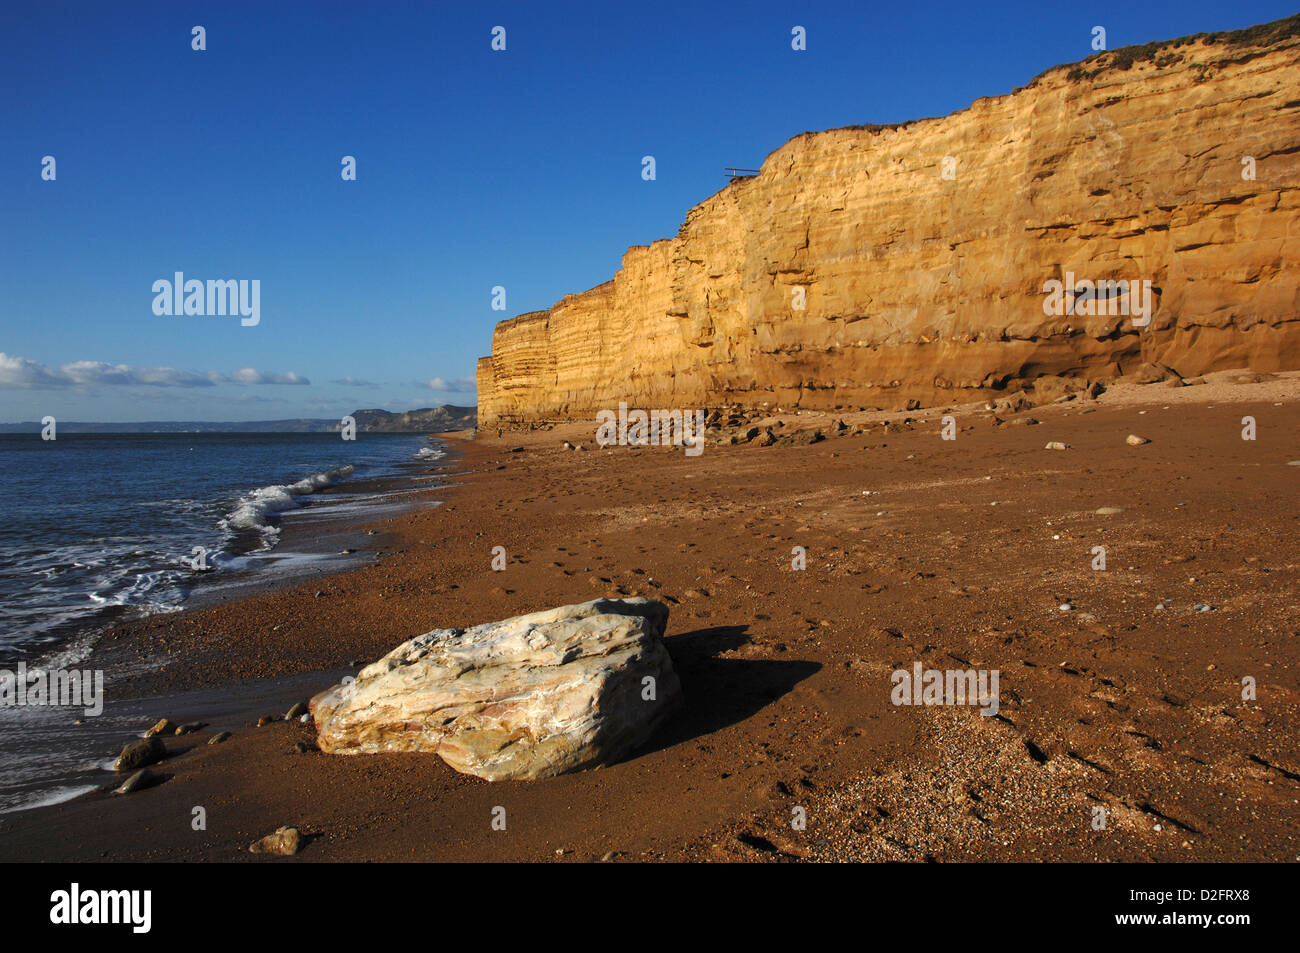 Sandstone cliff east of West Bay, Dorset, UK. showing bands of Bridport sands on the Jurassic coast. Stock Photo